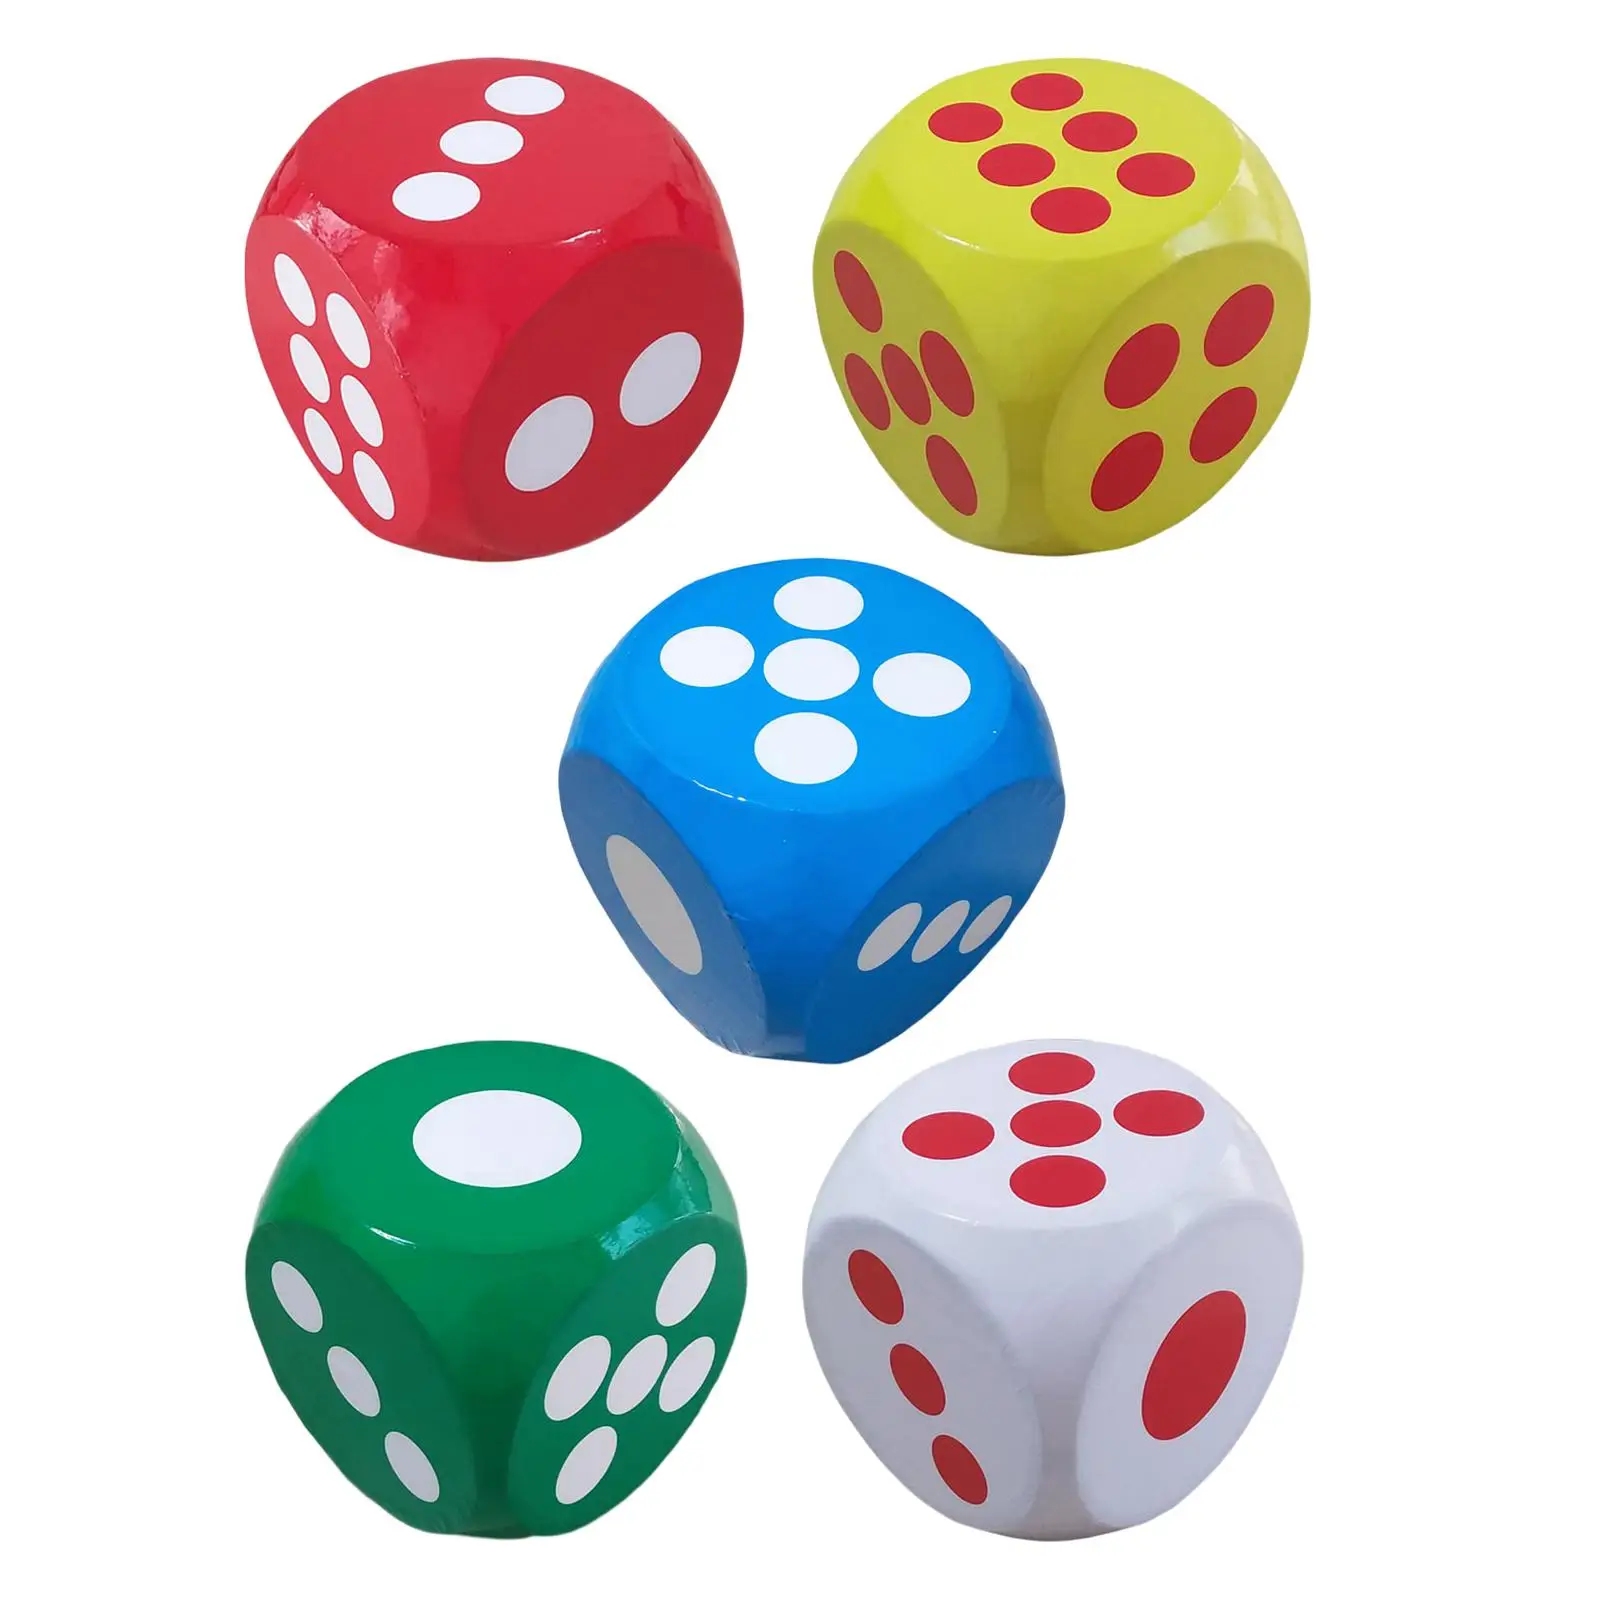 Foam Dot Dice Building Toys Early Learning Toys Big Square Blocks Large Dice Cubes for Children Boys Girls Party Favors Pastime